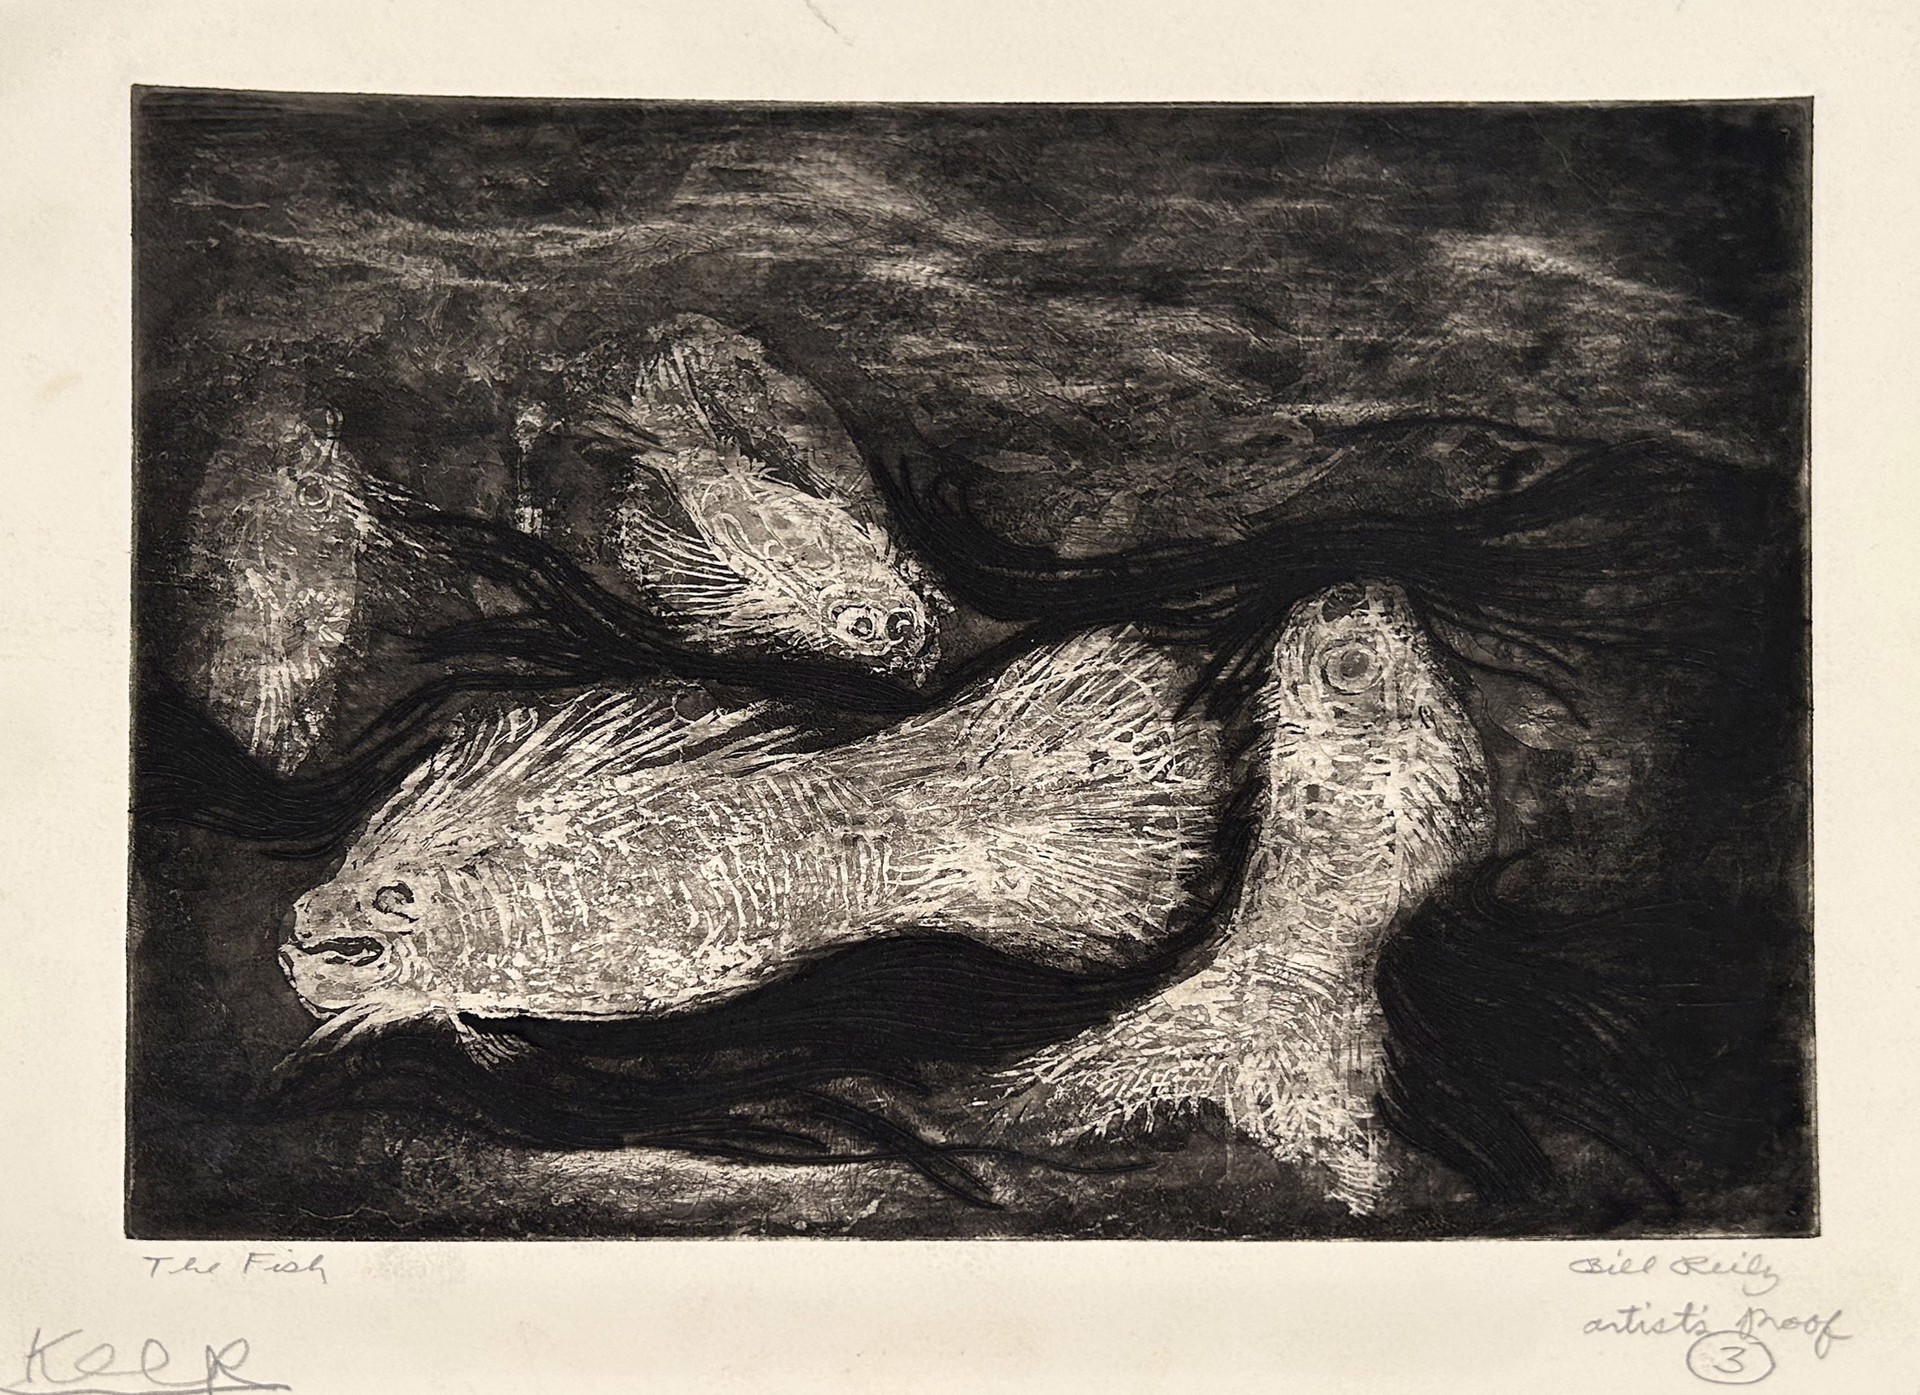 3b. The Fish (Artist's proof) by Bill Reily - Prints